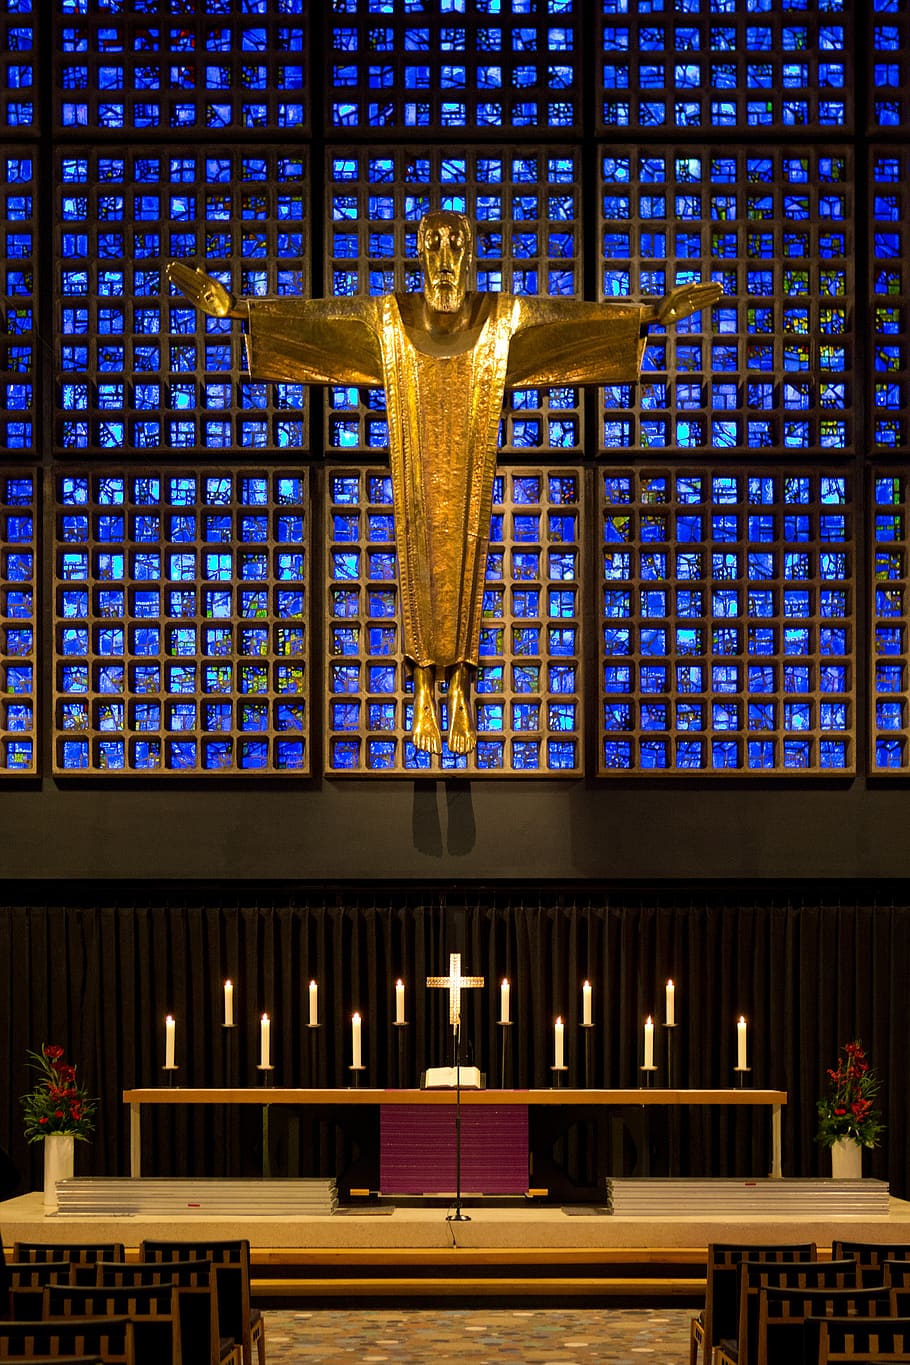 memorial, church, modern, altar, gold cruciform christ, vibrant stained glass, geometric, candles, berlin, christianity